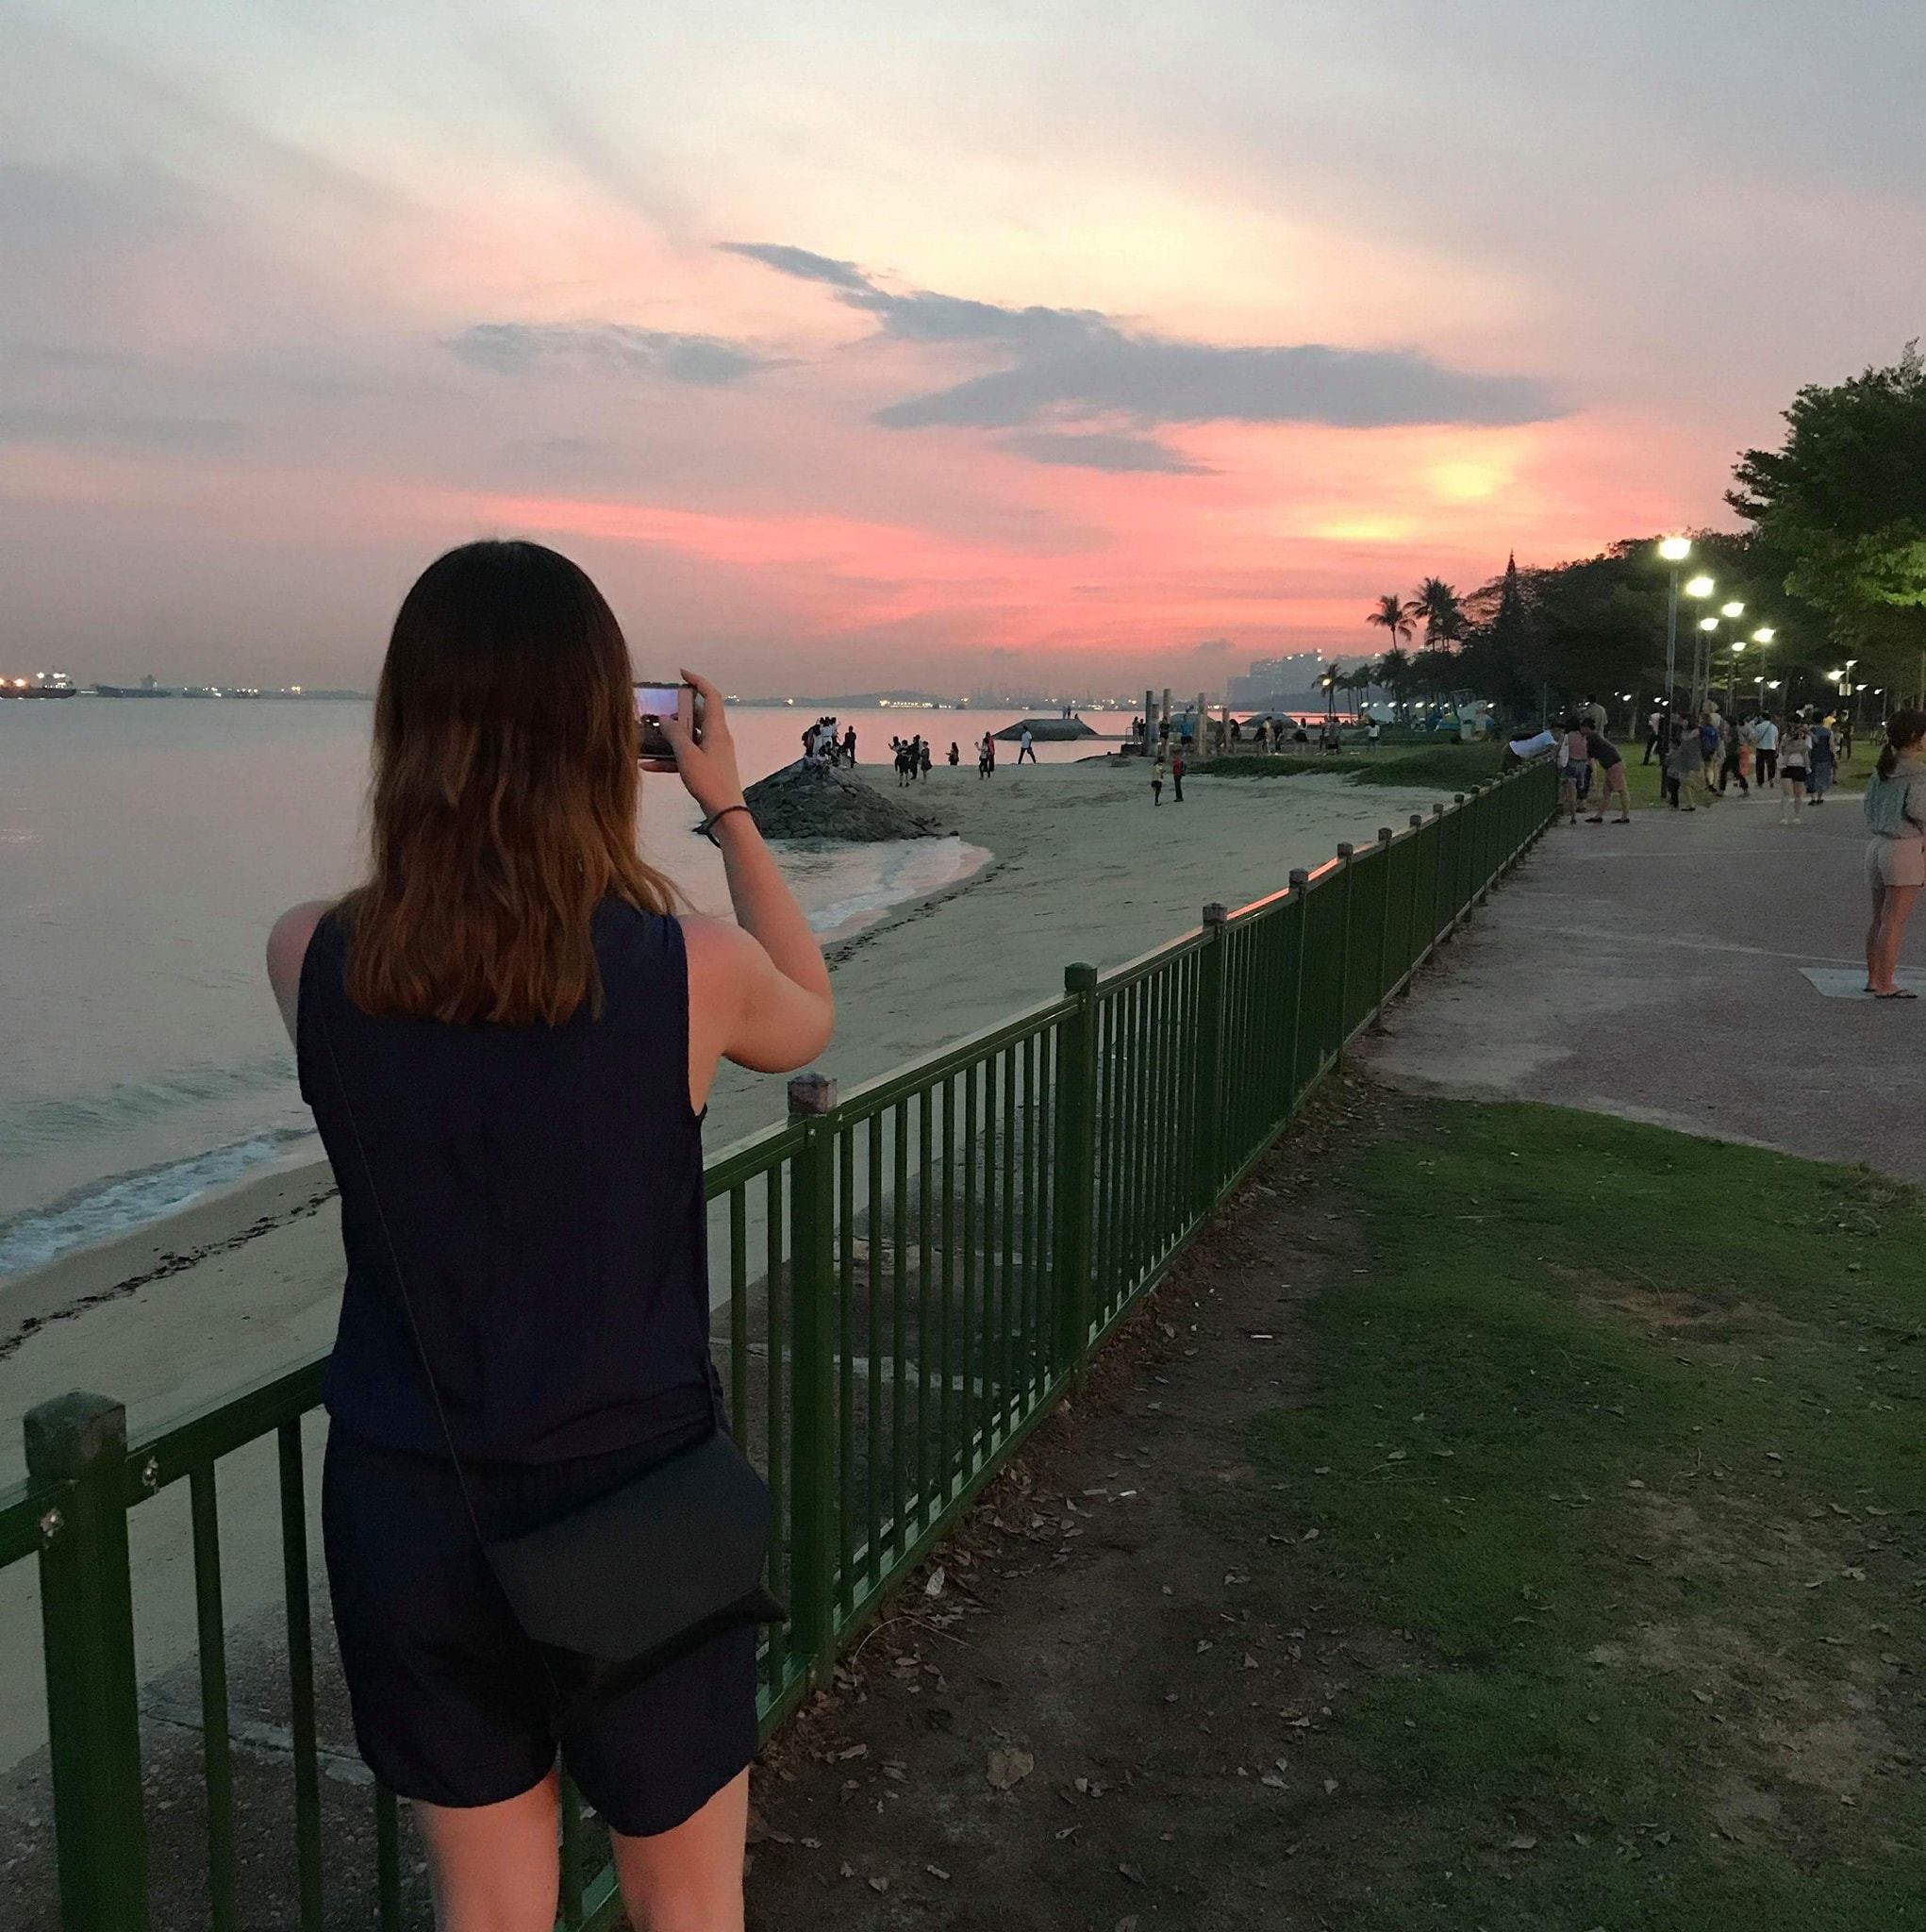 Opened Eyes and Heart – or how Zsofi’s SE Asia trip transformed her perspective